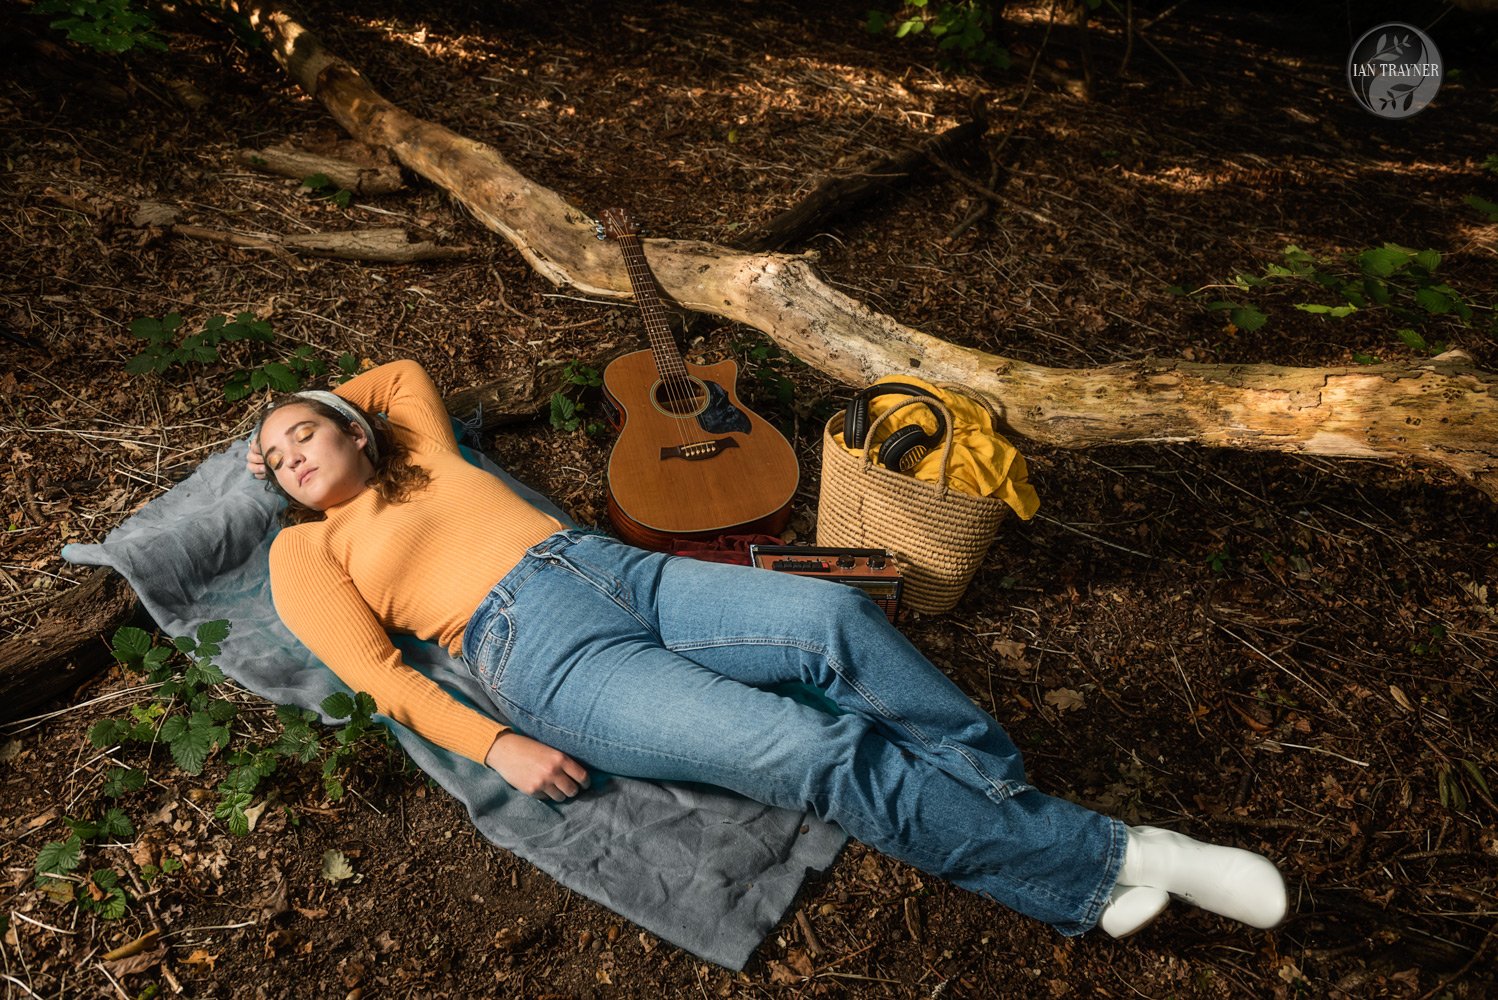 Fantasy photo shoot with Ian Trayner. Megan falls asleep in the forest.